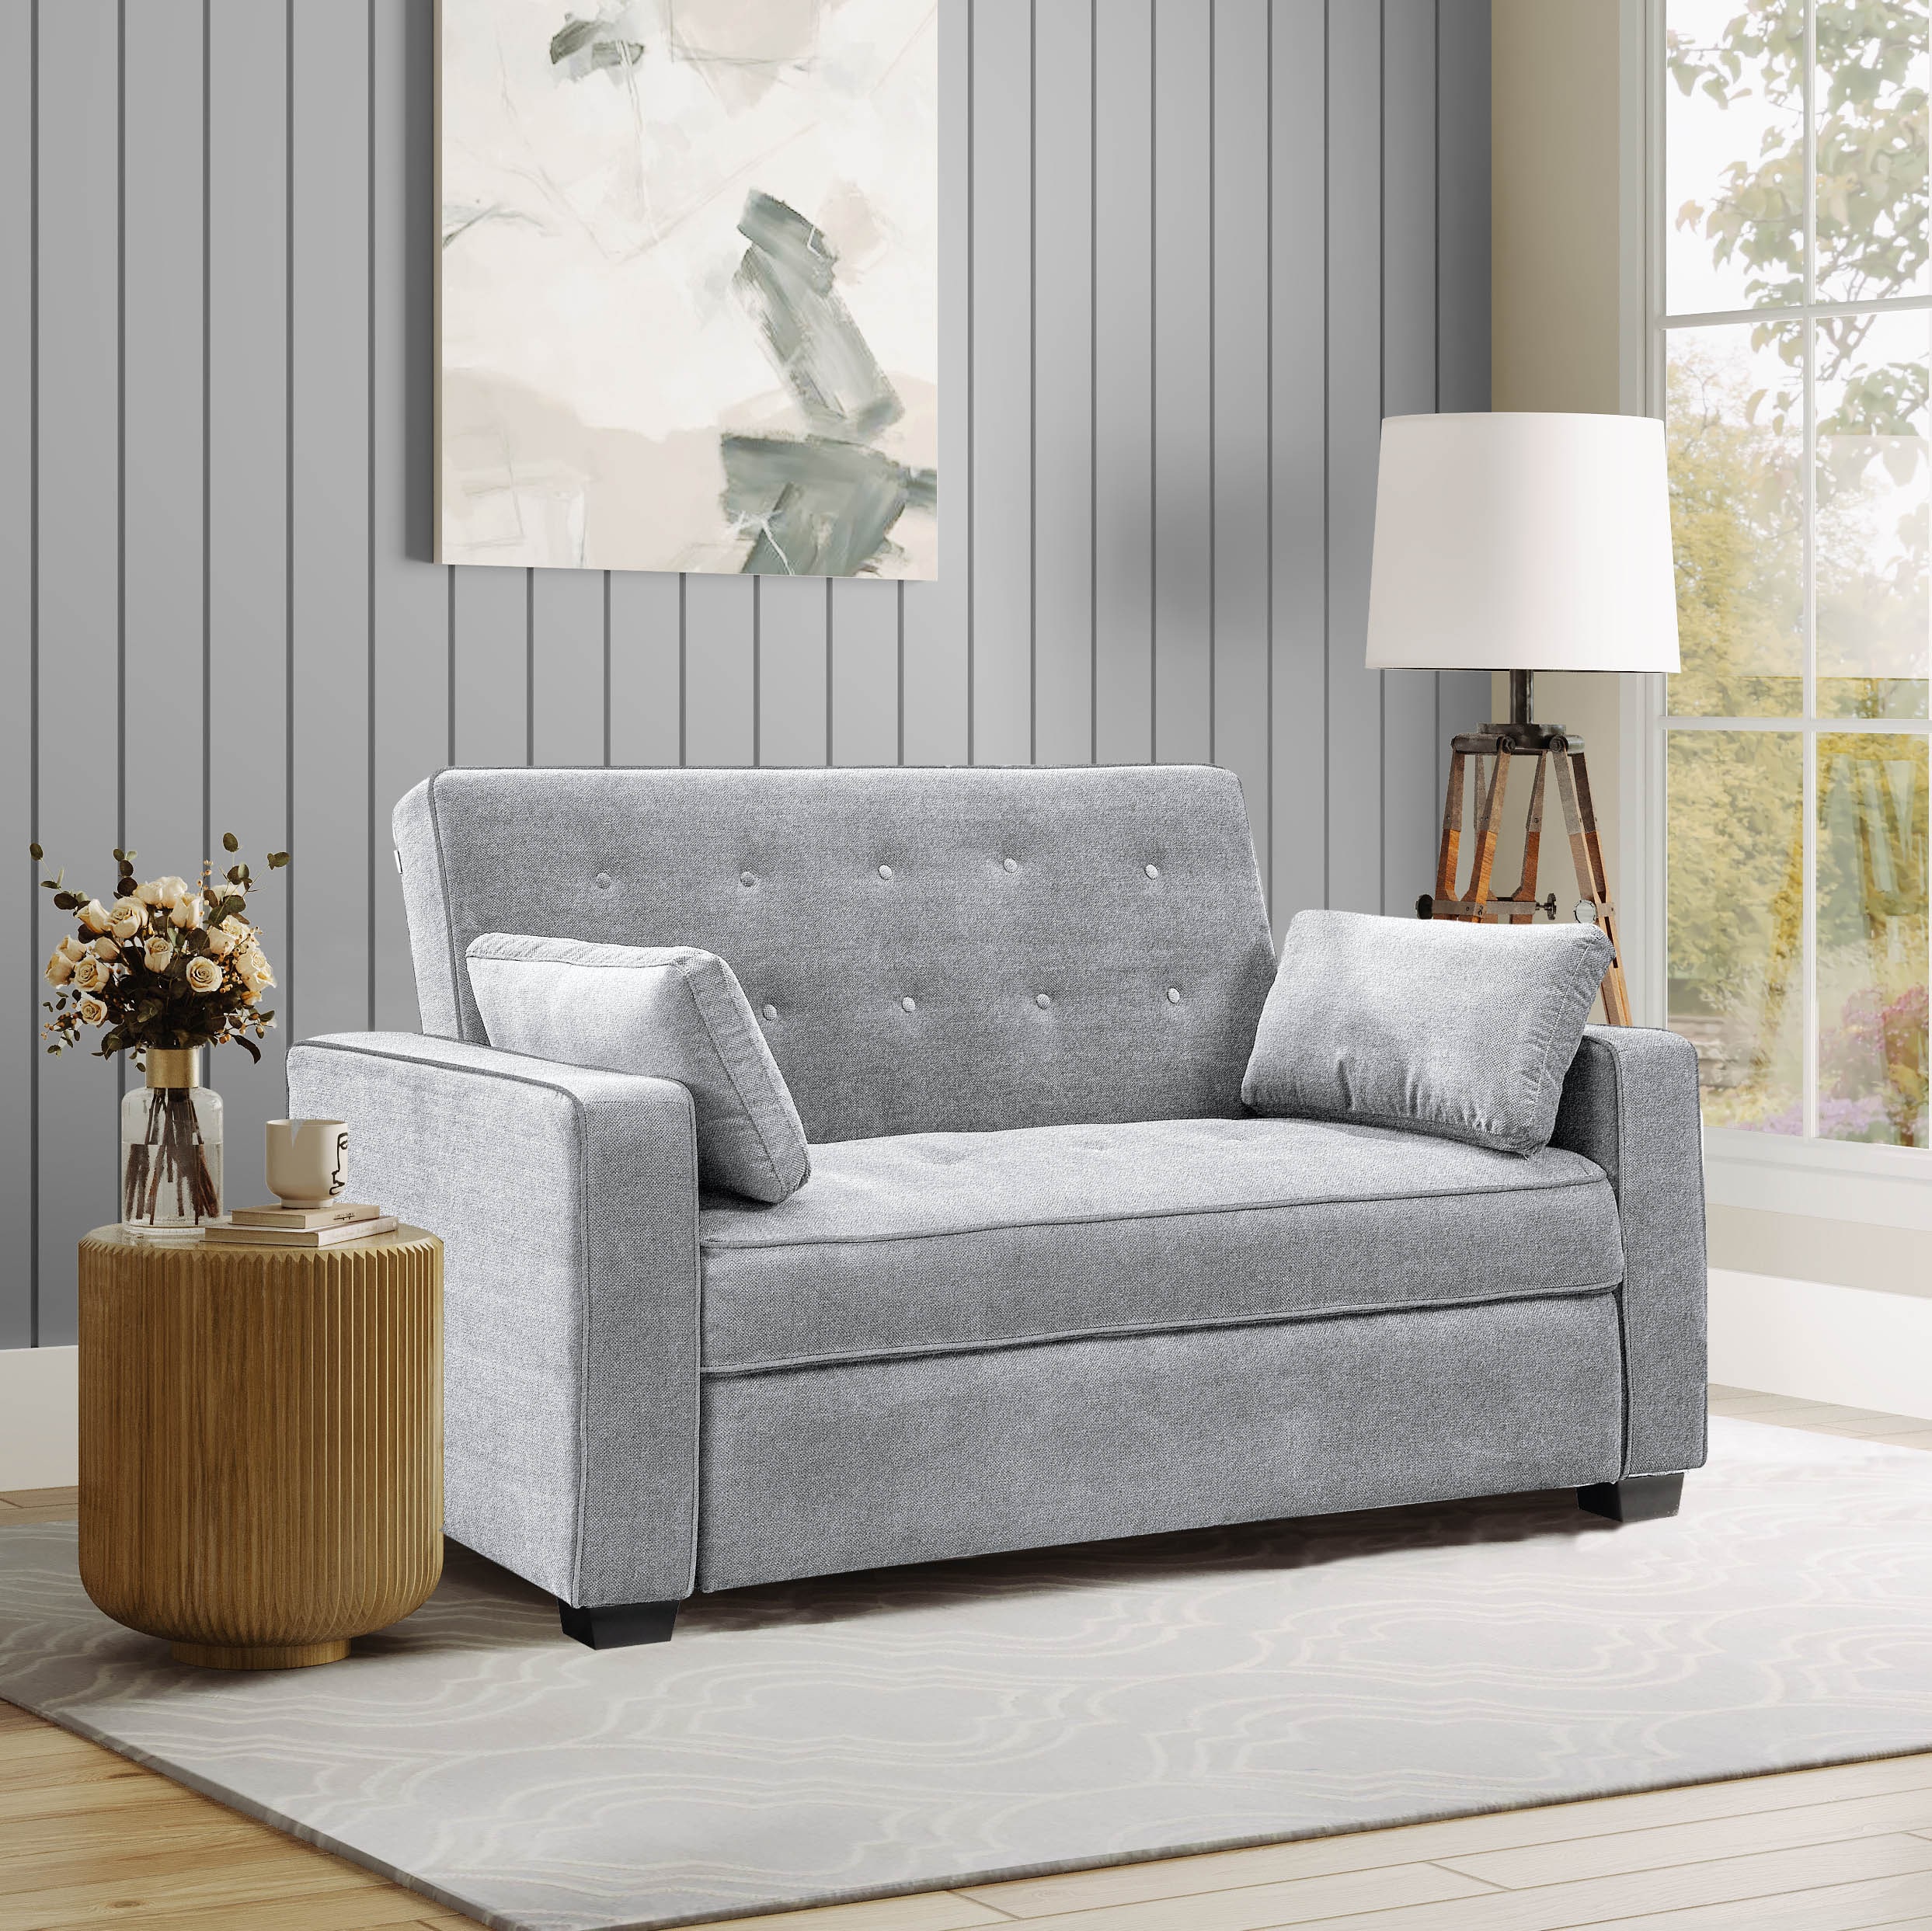 Sofa Polyester/Blend Light Grey in Modern Serta at 66.5-in & Loveseats the Sofas department Arya 2-seater Couches,